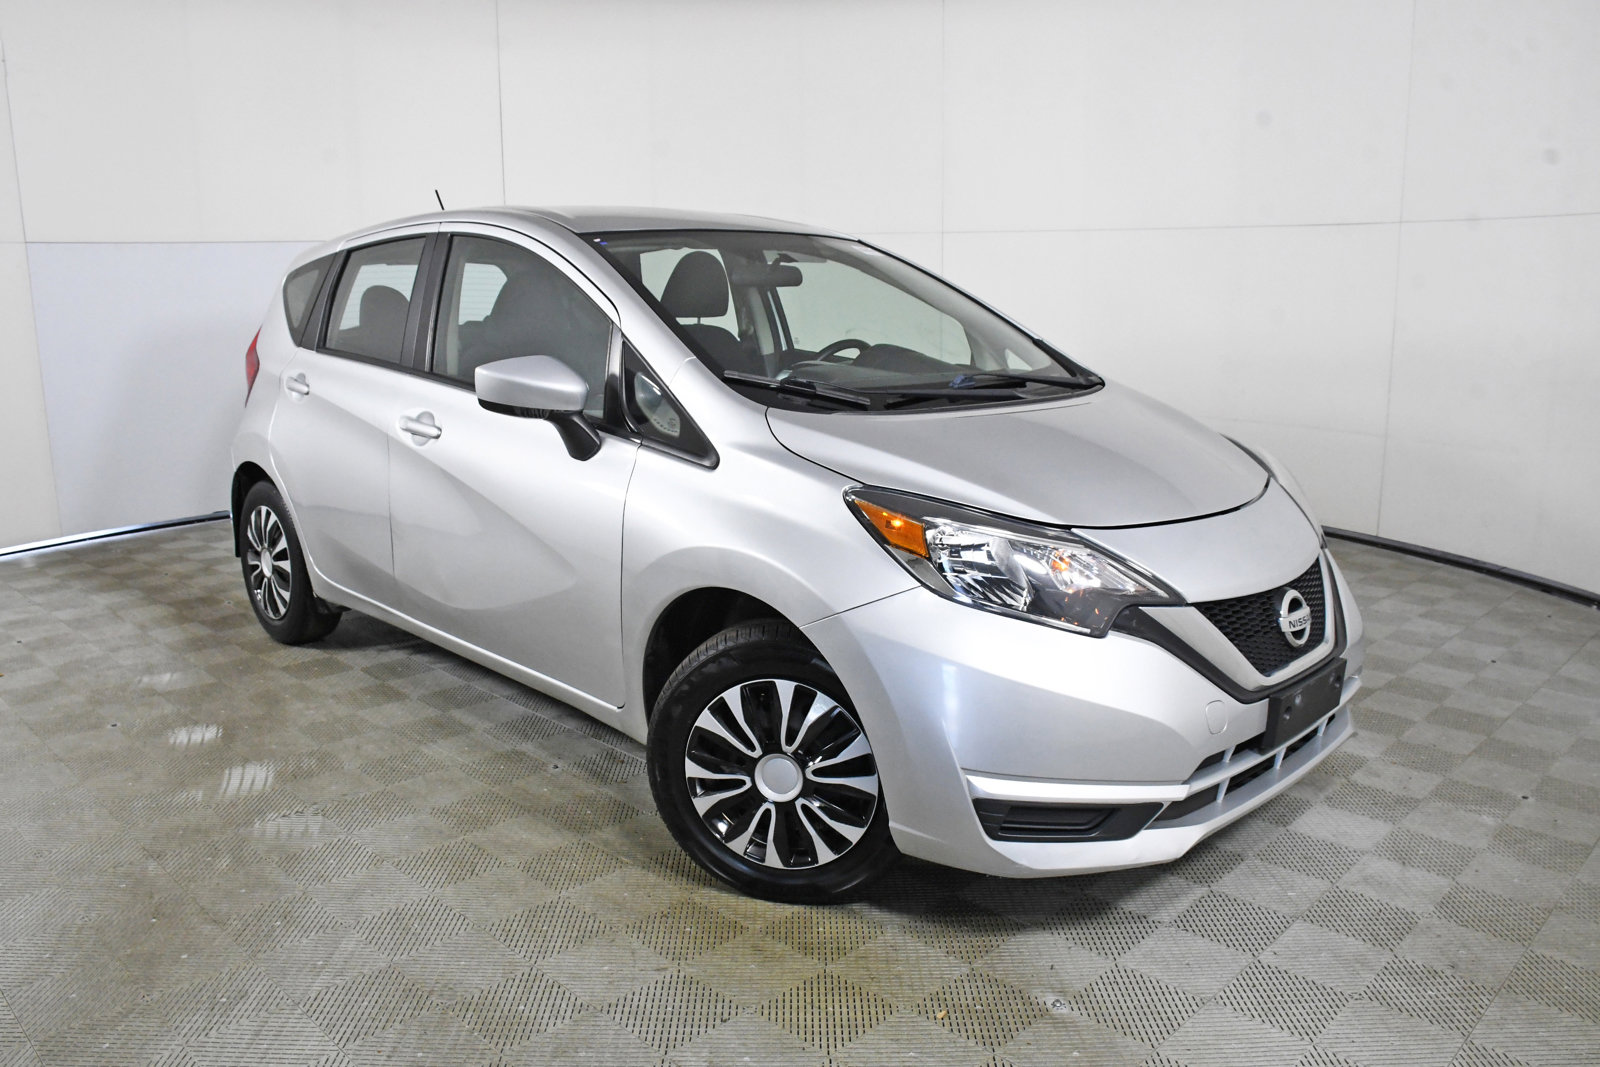 Pre-Owned 2017 Nissan Versa Note SV Hatchback in Palmetto Bay #L367491 |  HGreg Nissan Kendall